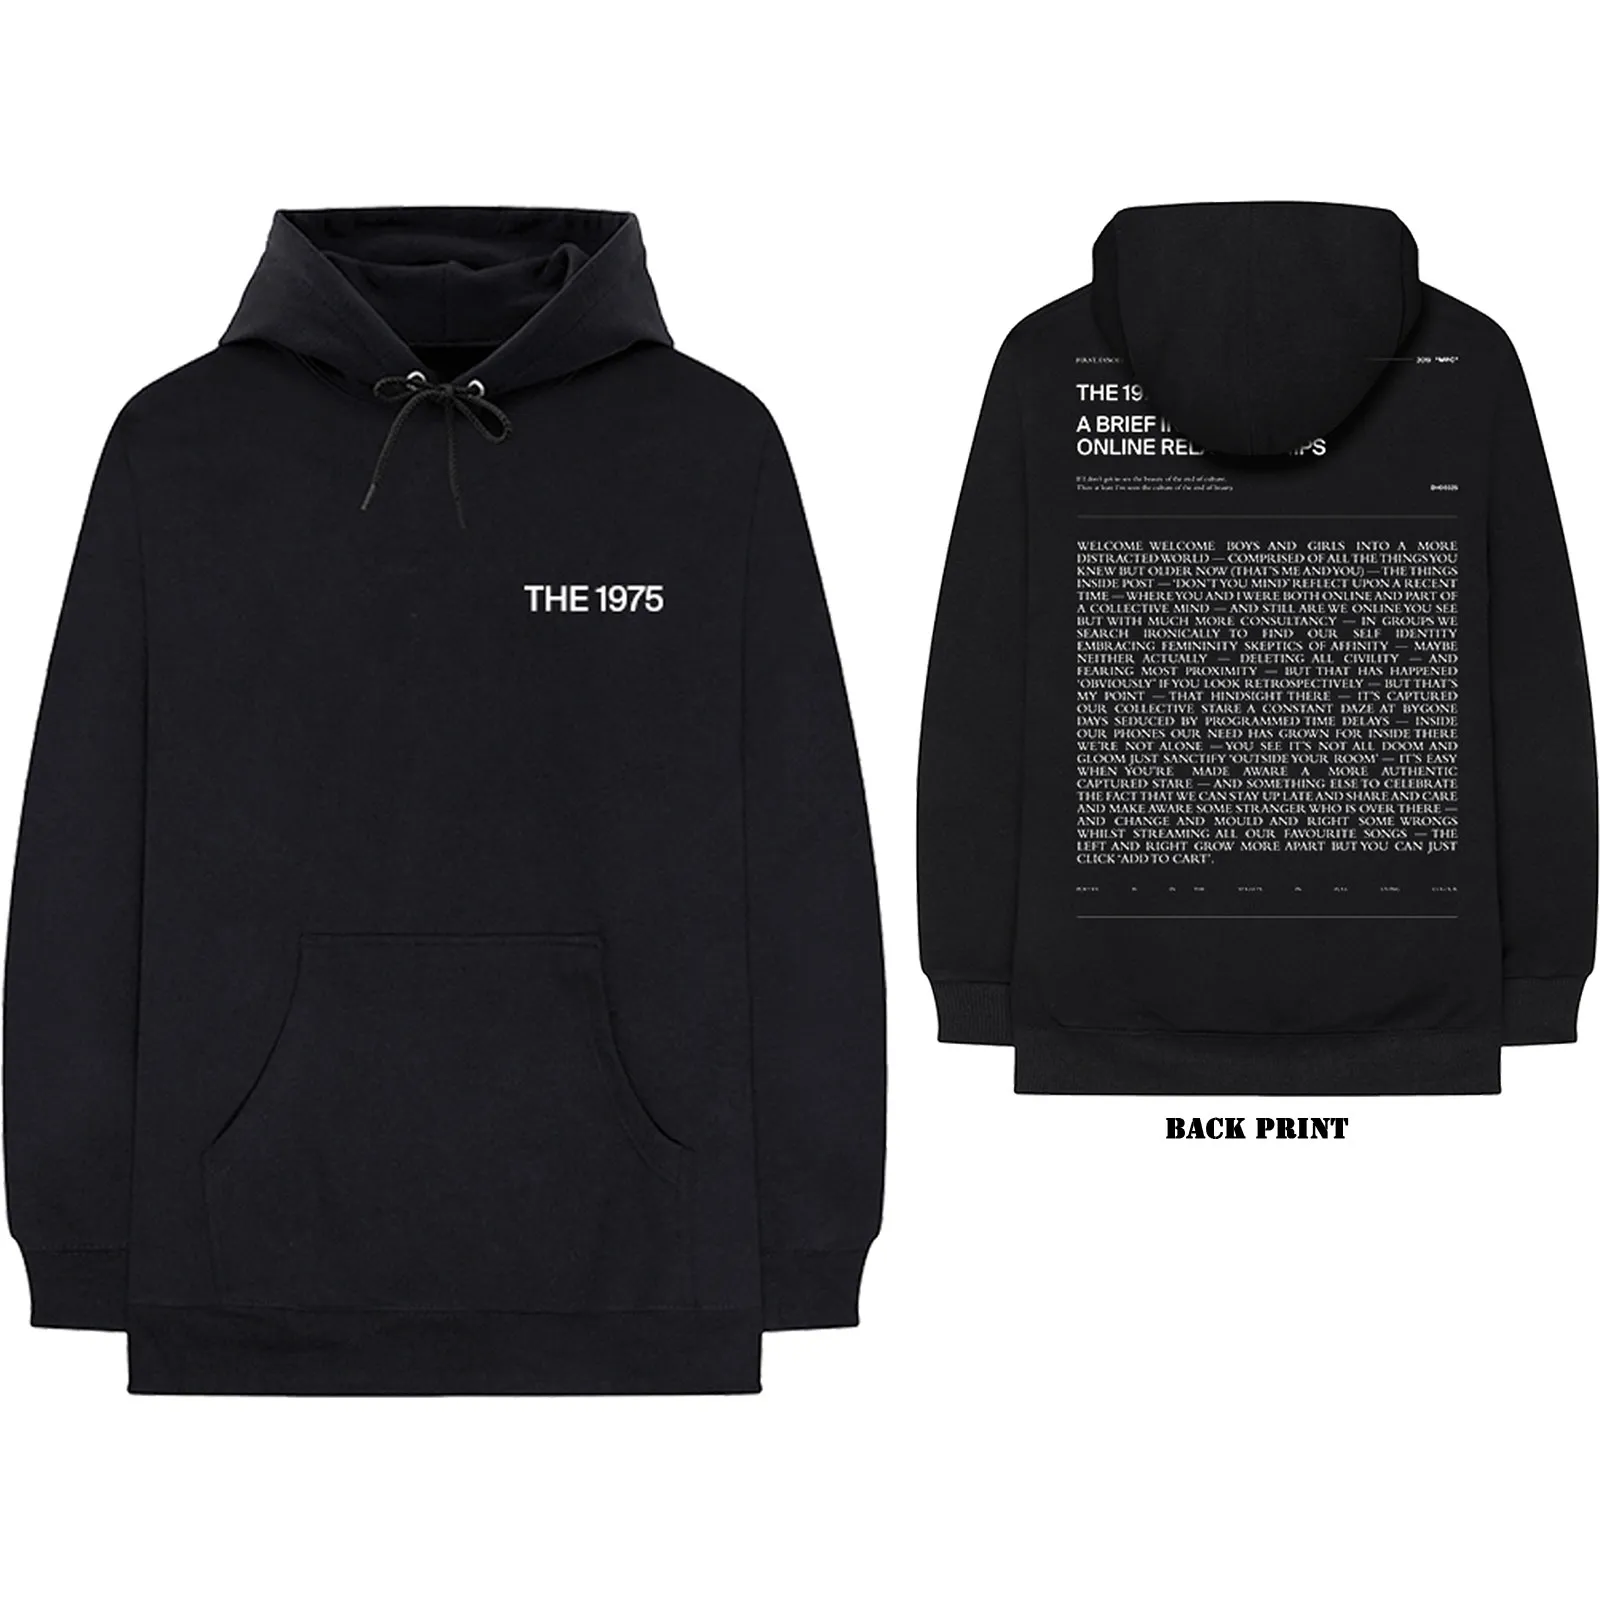 The 1975 - Unisex Pullover Hoodie ABIIOR Welcome Welcome Version 2. Back Print artwork